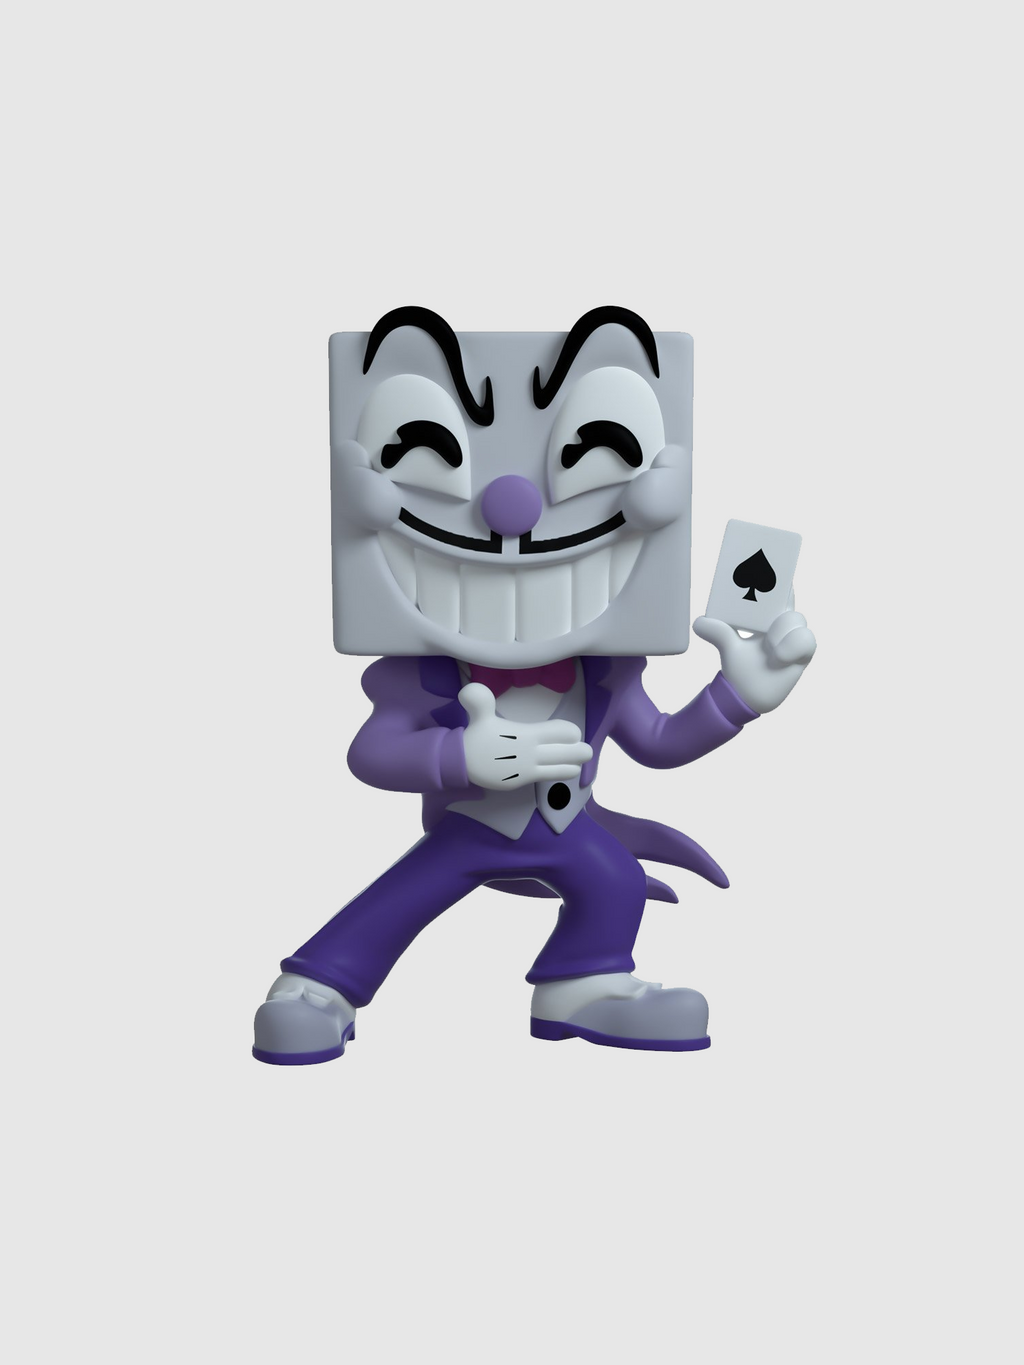 Action Figure Insider » “The Cuphead Show” Launches New Merchandise  Inspired by the Video Game and Netflix Series